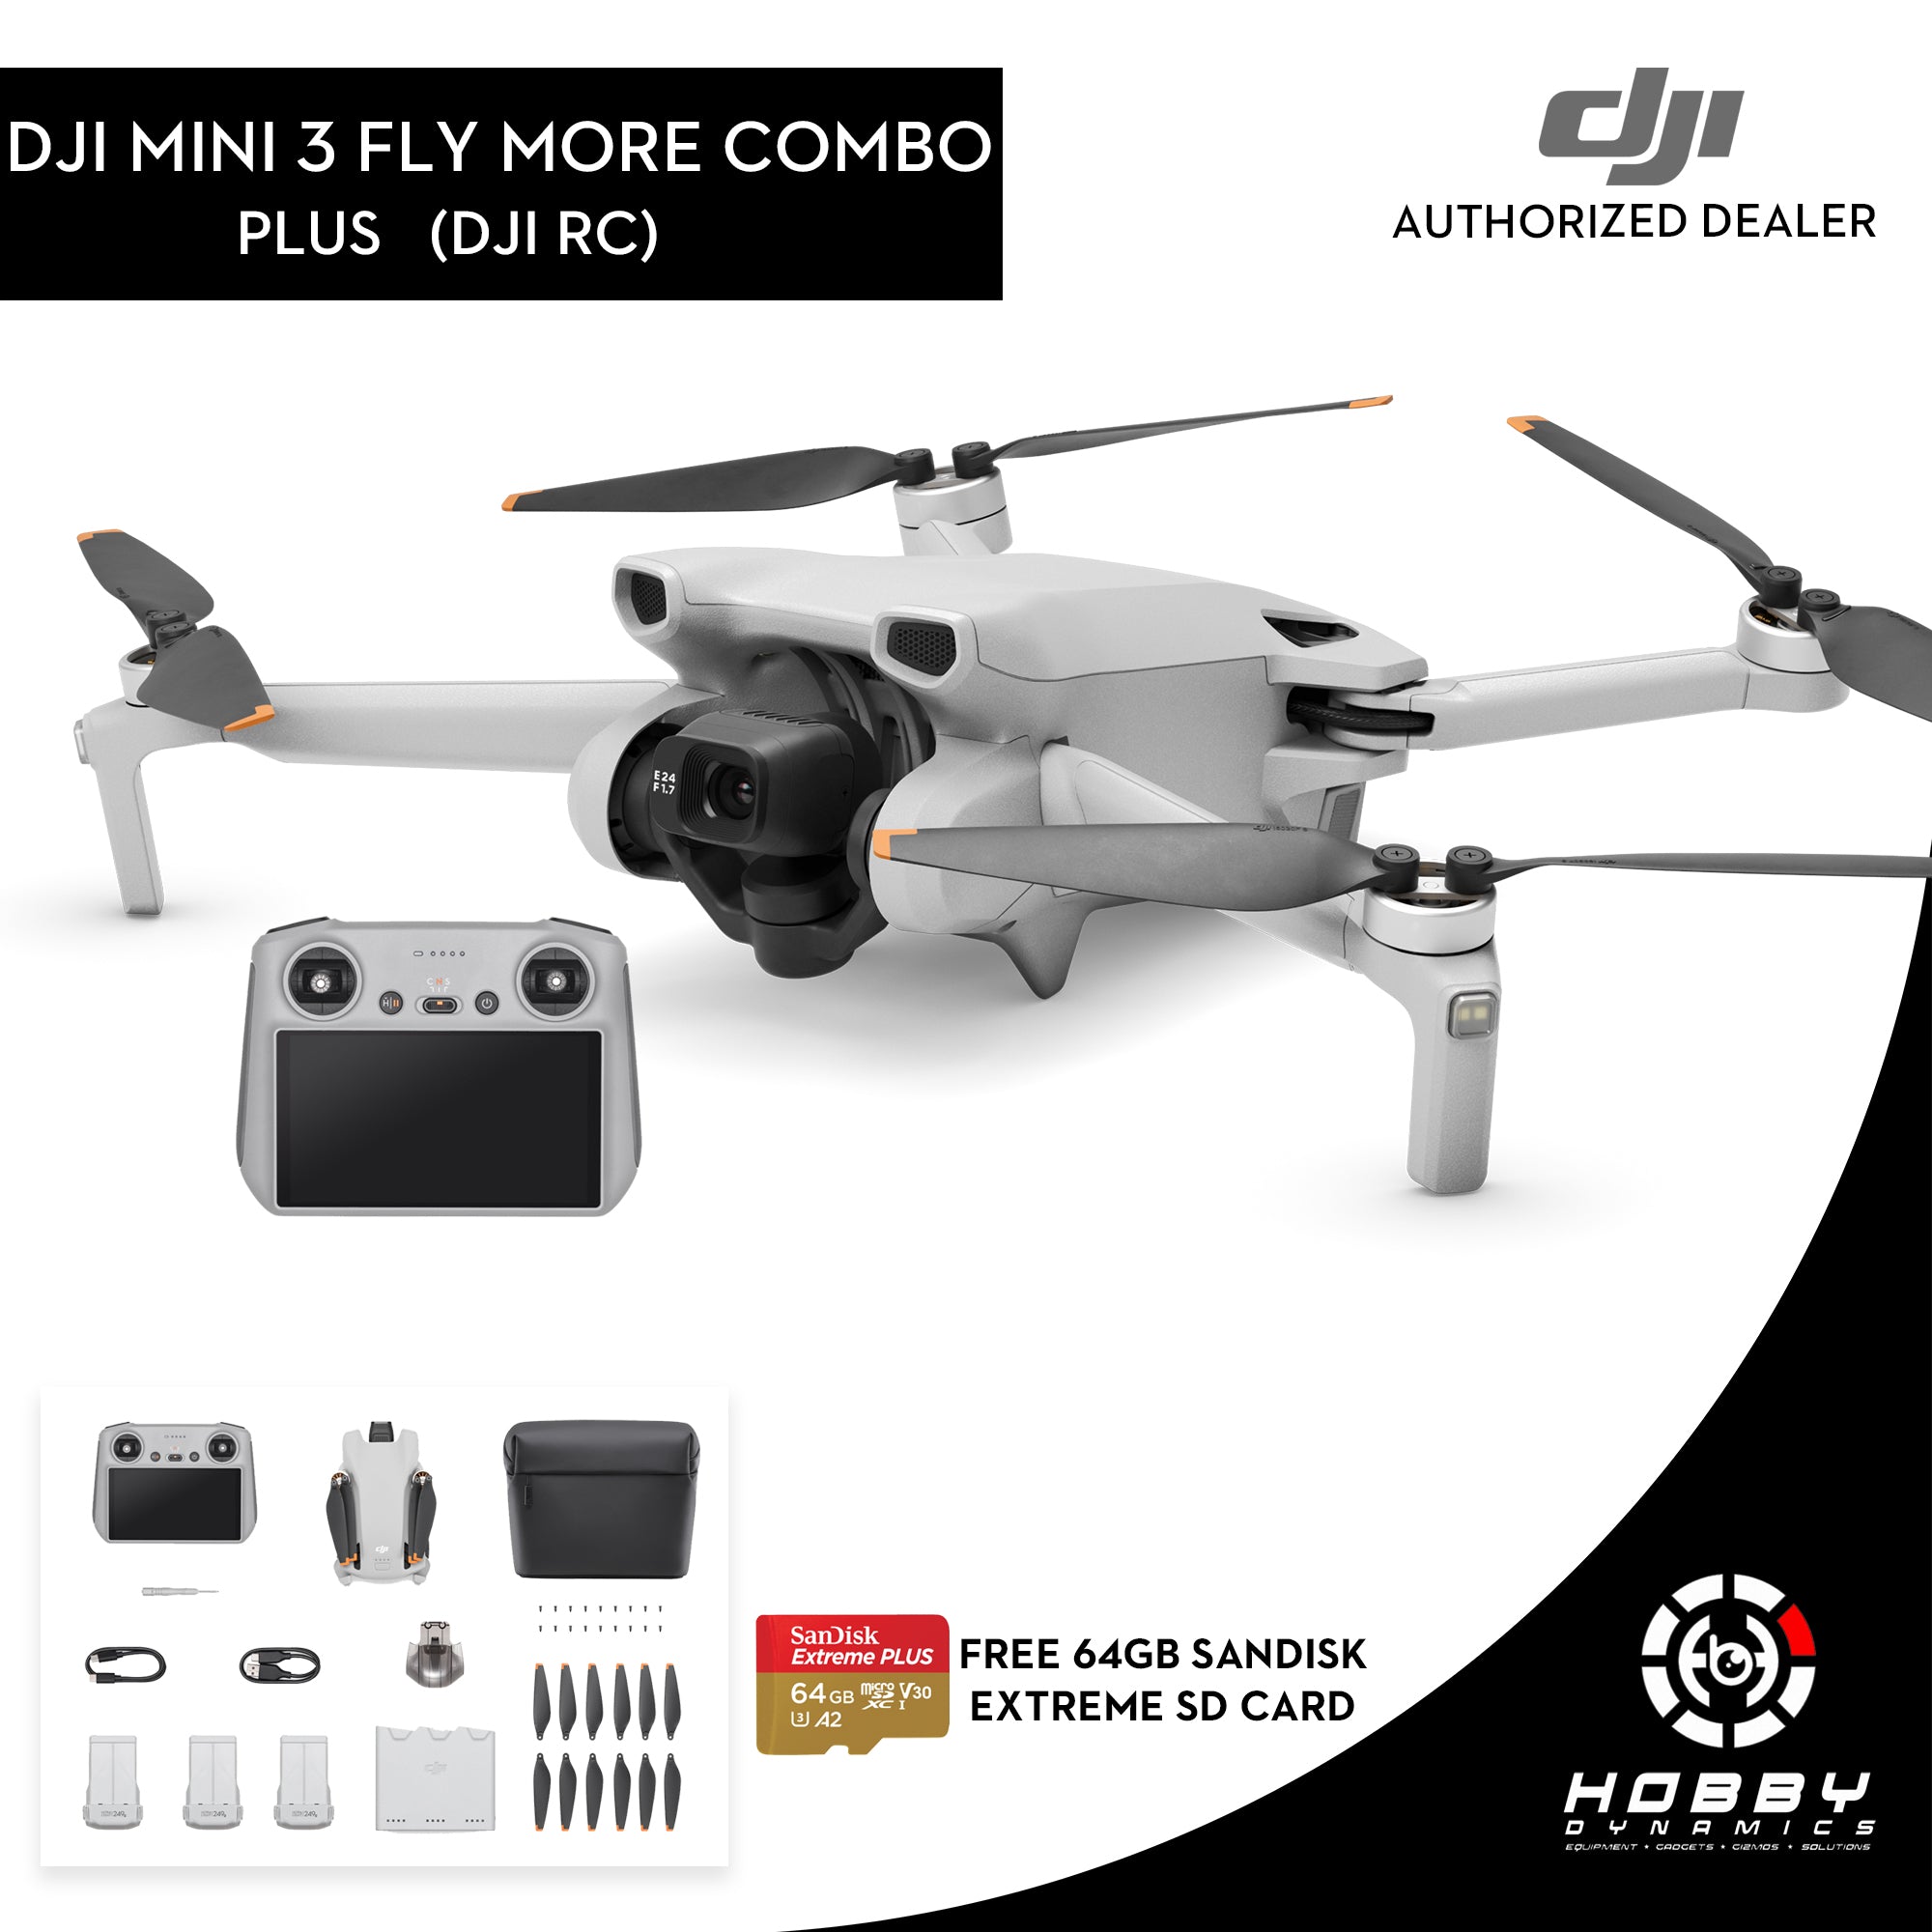 DJI Mini 3 Fly More Combo Plus (DJI RC) with FREE Sandisk Extreme ...